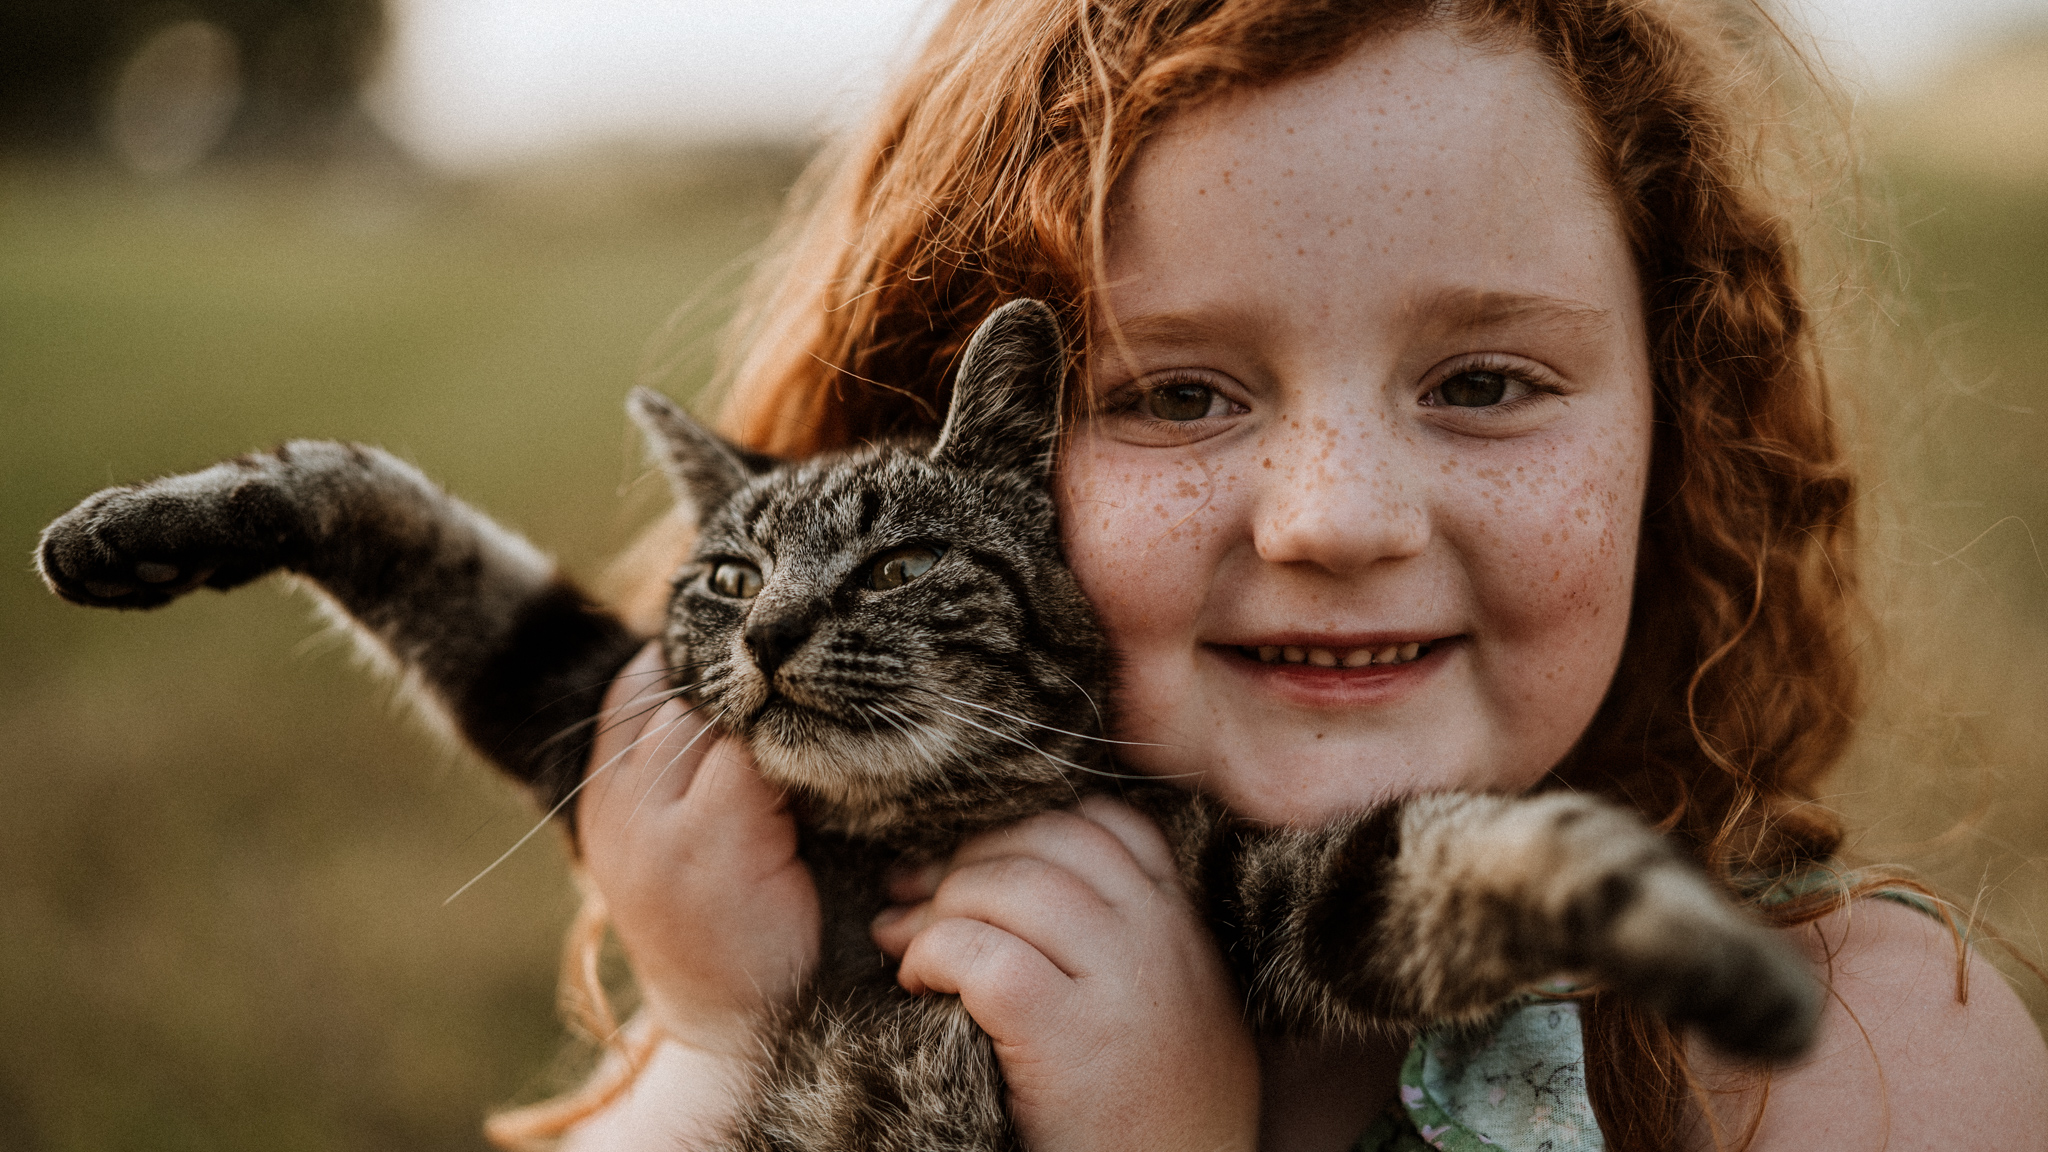 Family Photos at Home; young redheaded girl holding her favorite kitten